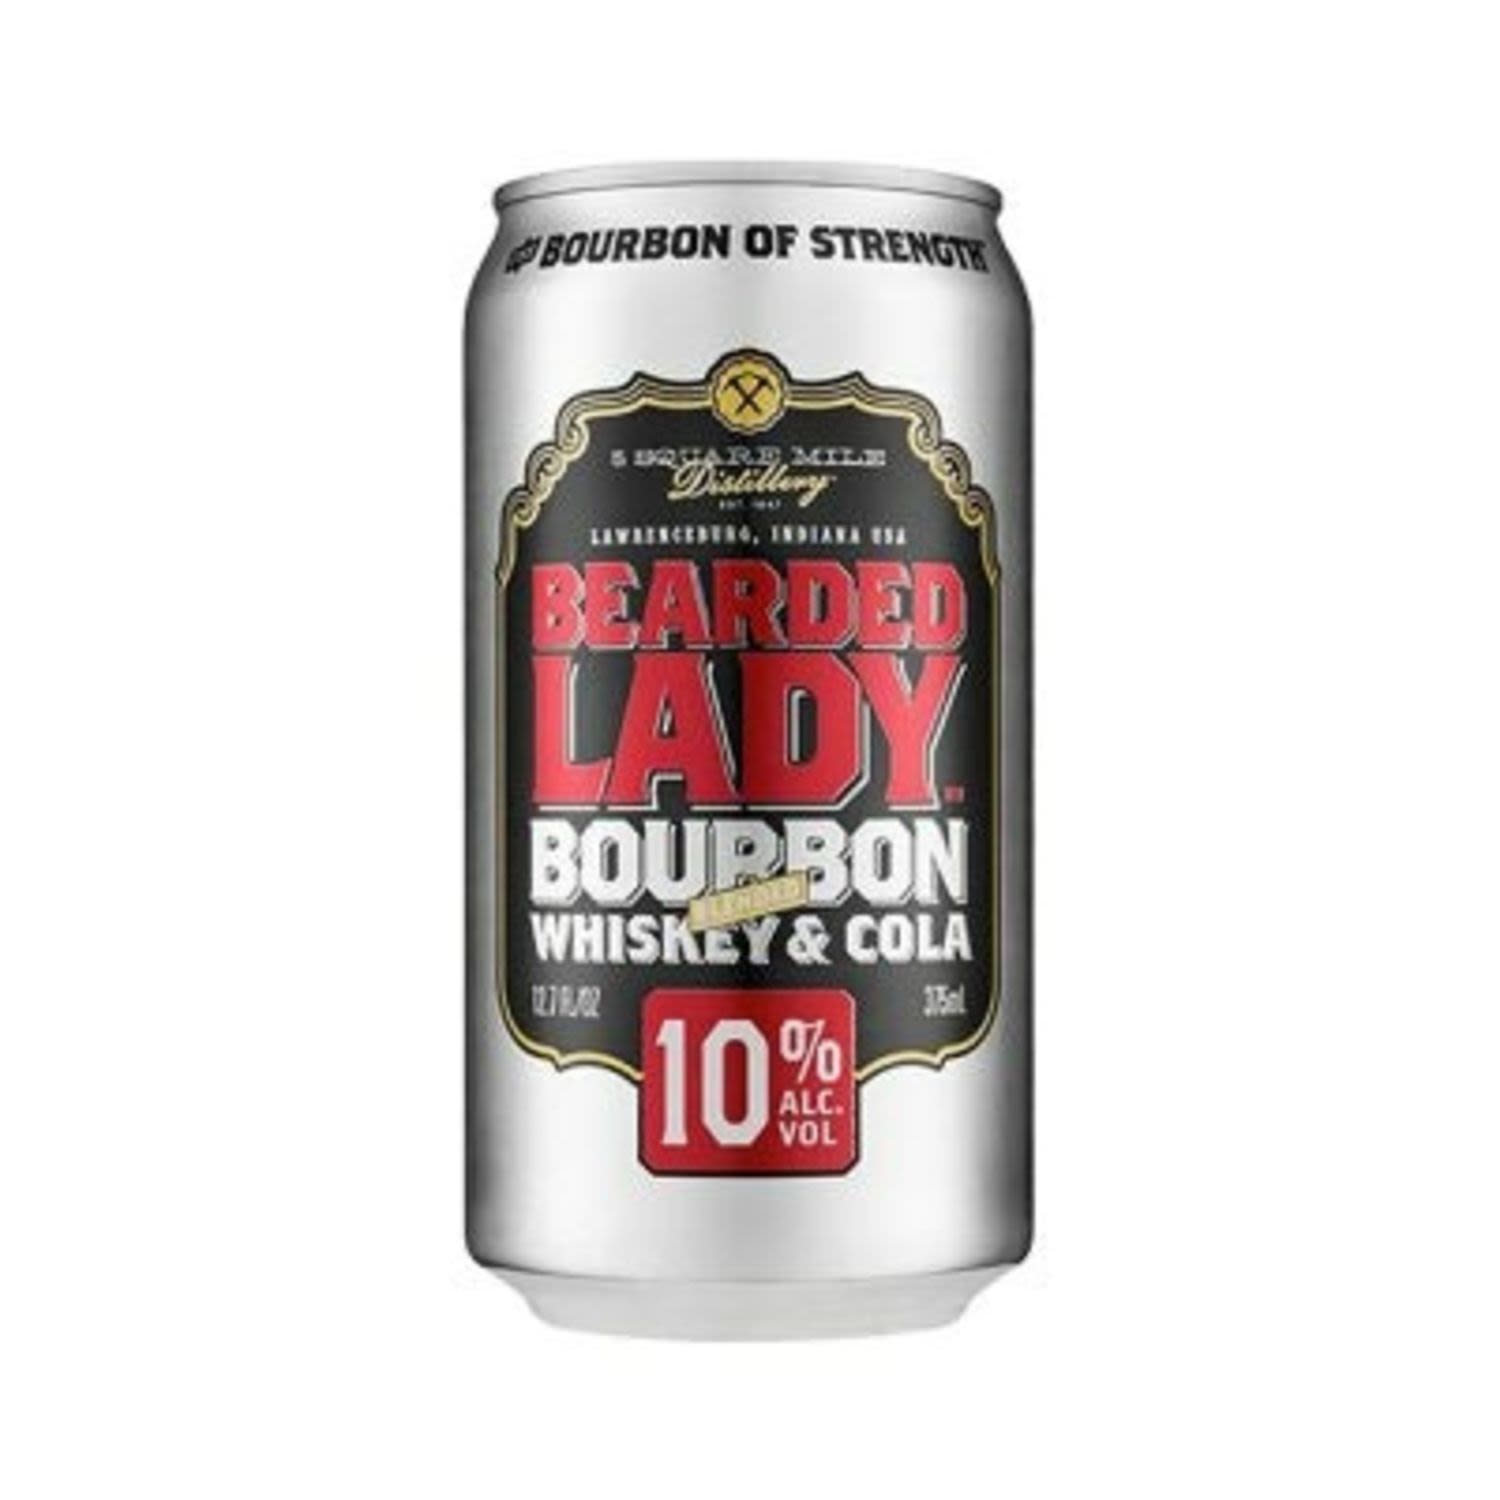 Bearded Lady Bourbon is made with a strength you can taste. It delivers a full bourbon vanilla oak flavour and a cola that doesnt overpower the bourbon sweetness.<br /> <br />Alcohol Volume: 10.00%<br /><br />Pack Format: 4 Pack<br /><br />Standard Drinks: 3<br /><br />Pack Type: Can<br />